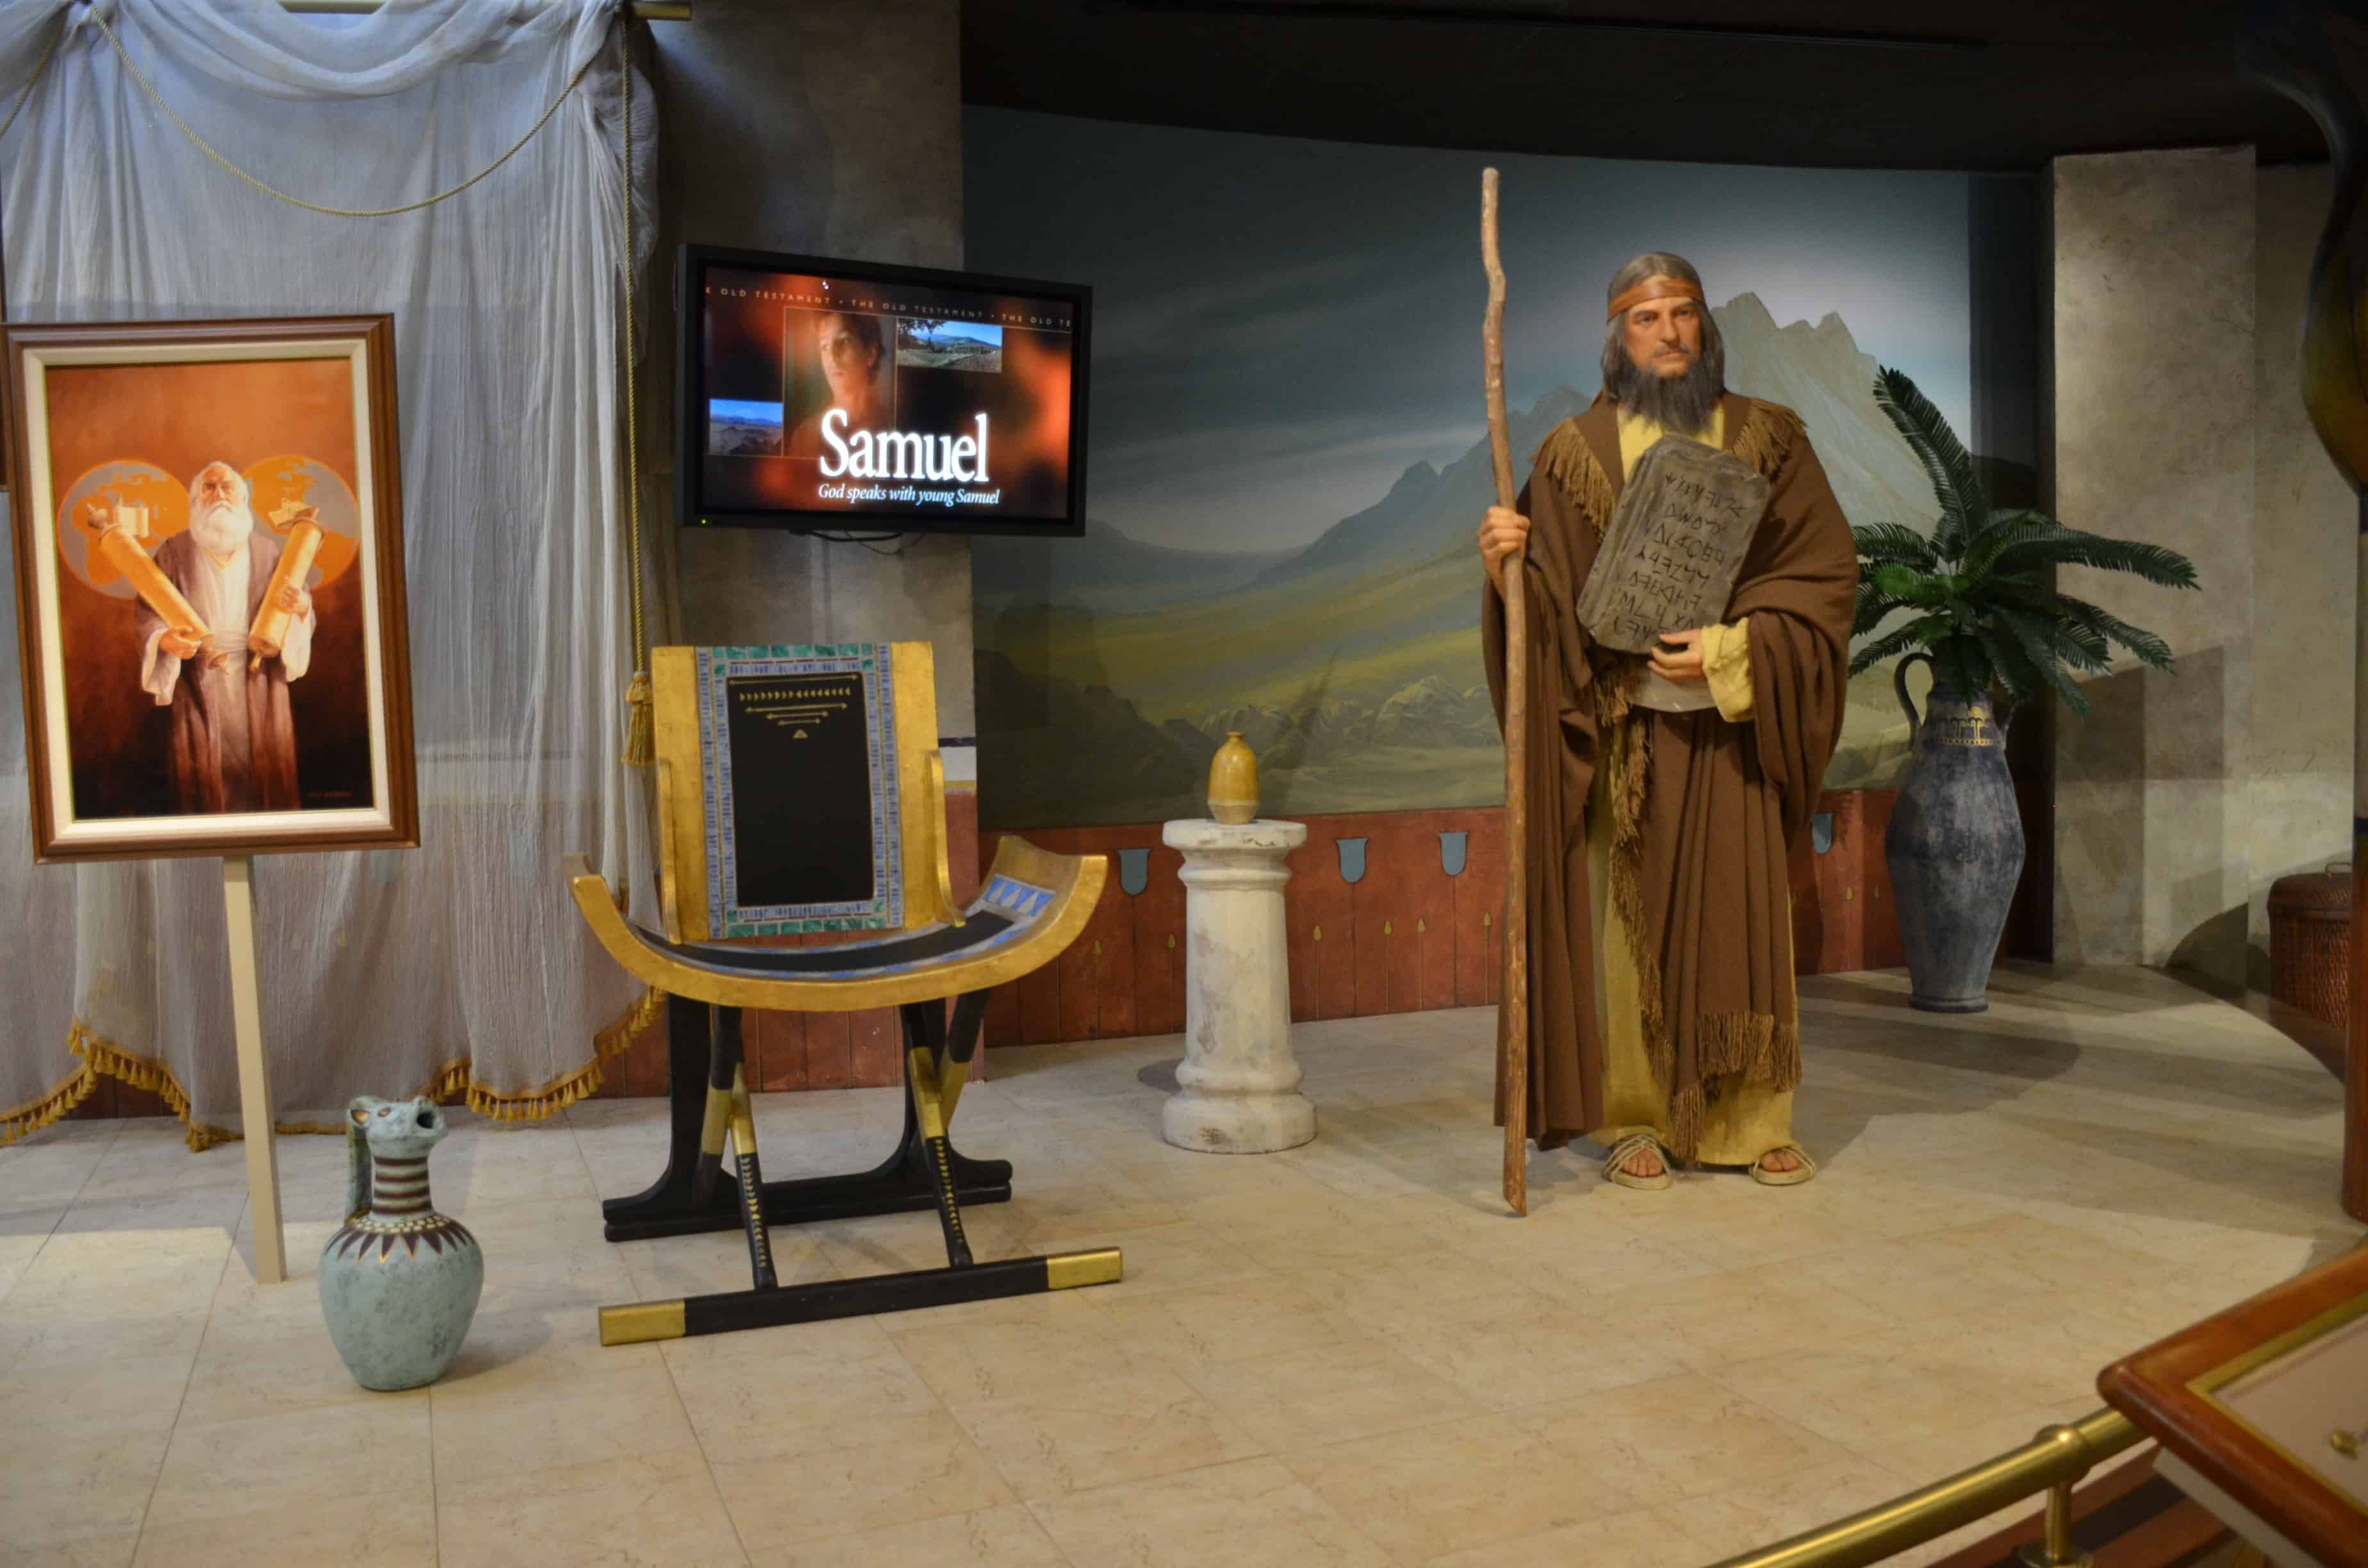 Samuel in the prophets exhibit in the North Visitors' Center at Temple Square in Salt Lake City, Utah